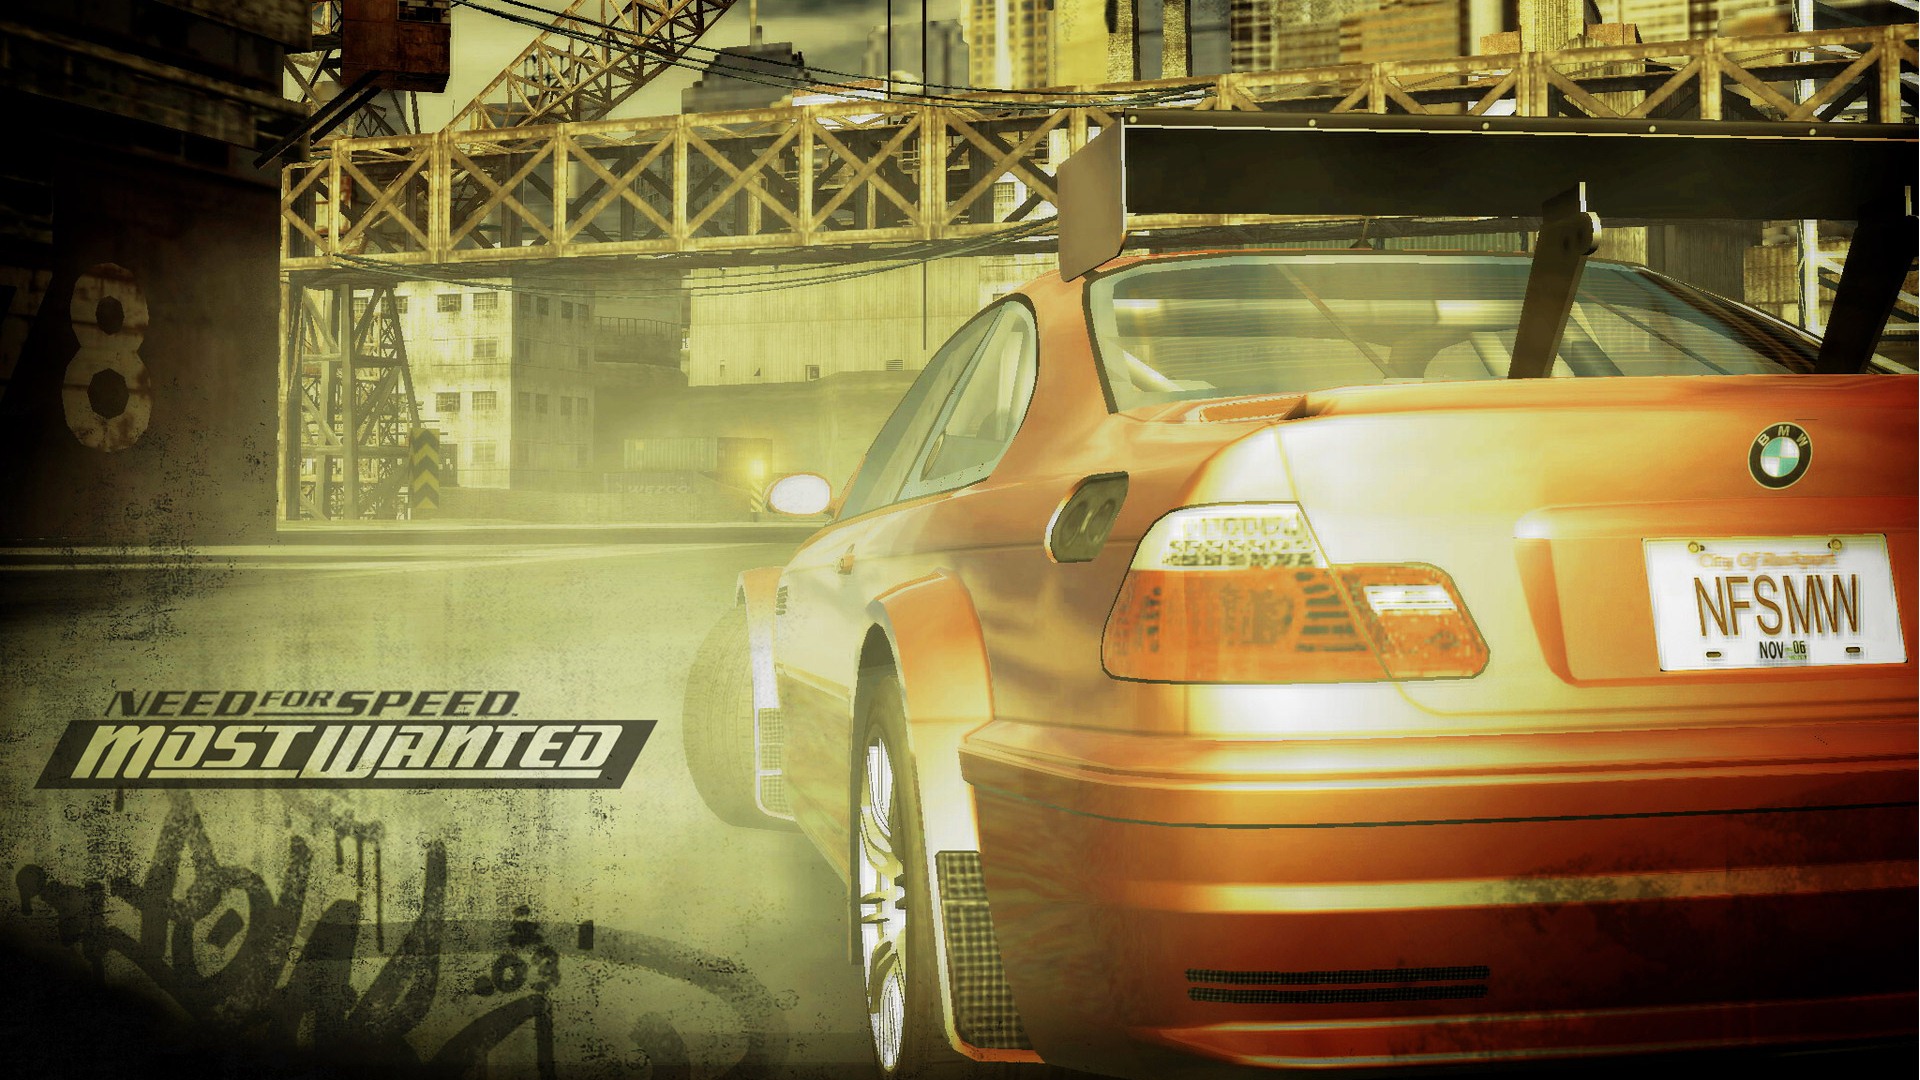 Need for Speed: Most Wanted 极品飞车17：最高通缉 高清壁纸4 - 1920x1080